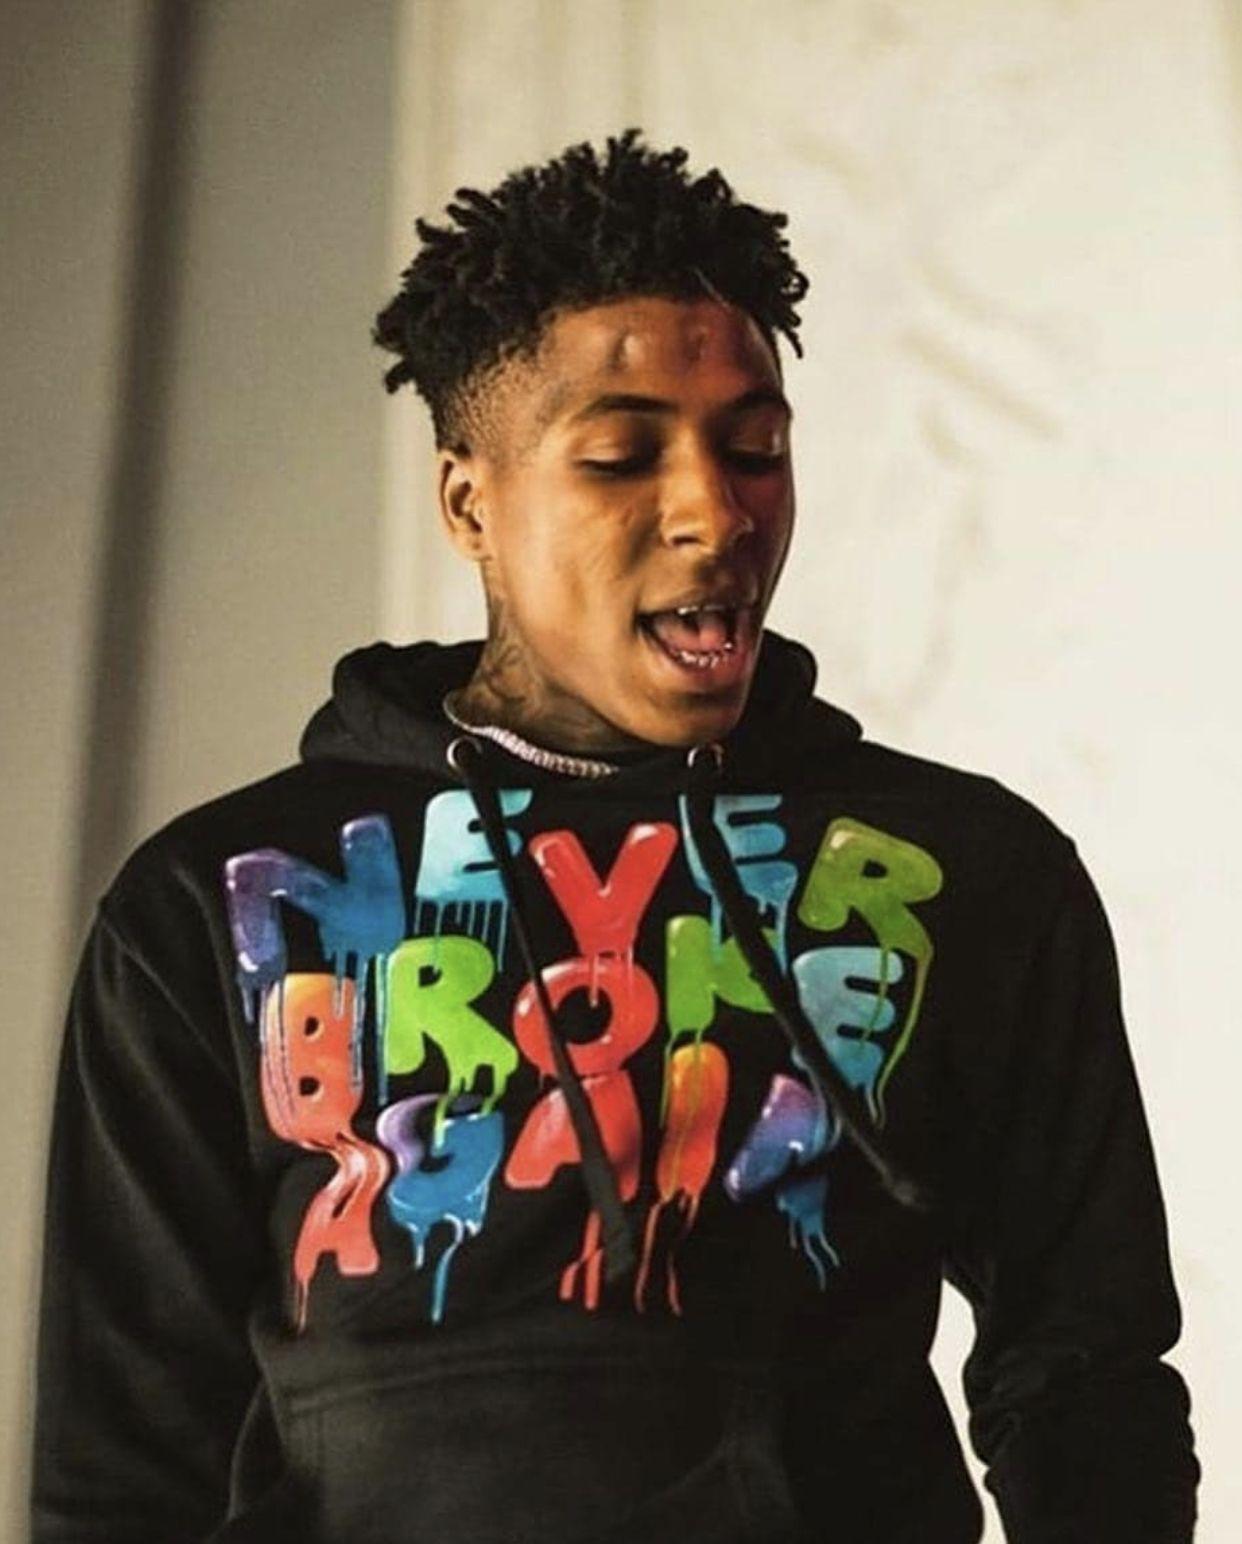 nba youngboy 38 baby wallpapers posted by ryan simpson on nba youngboy 38 baby wallpapers